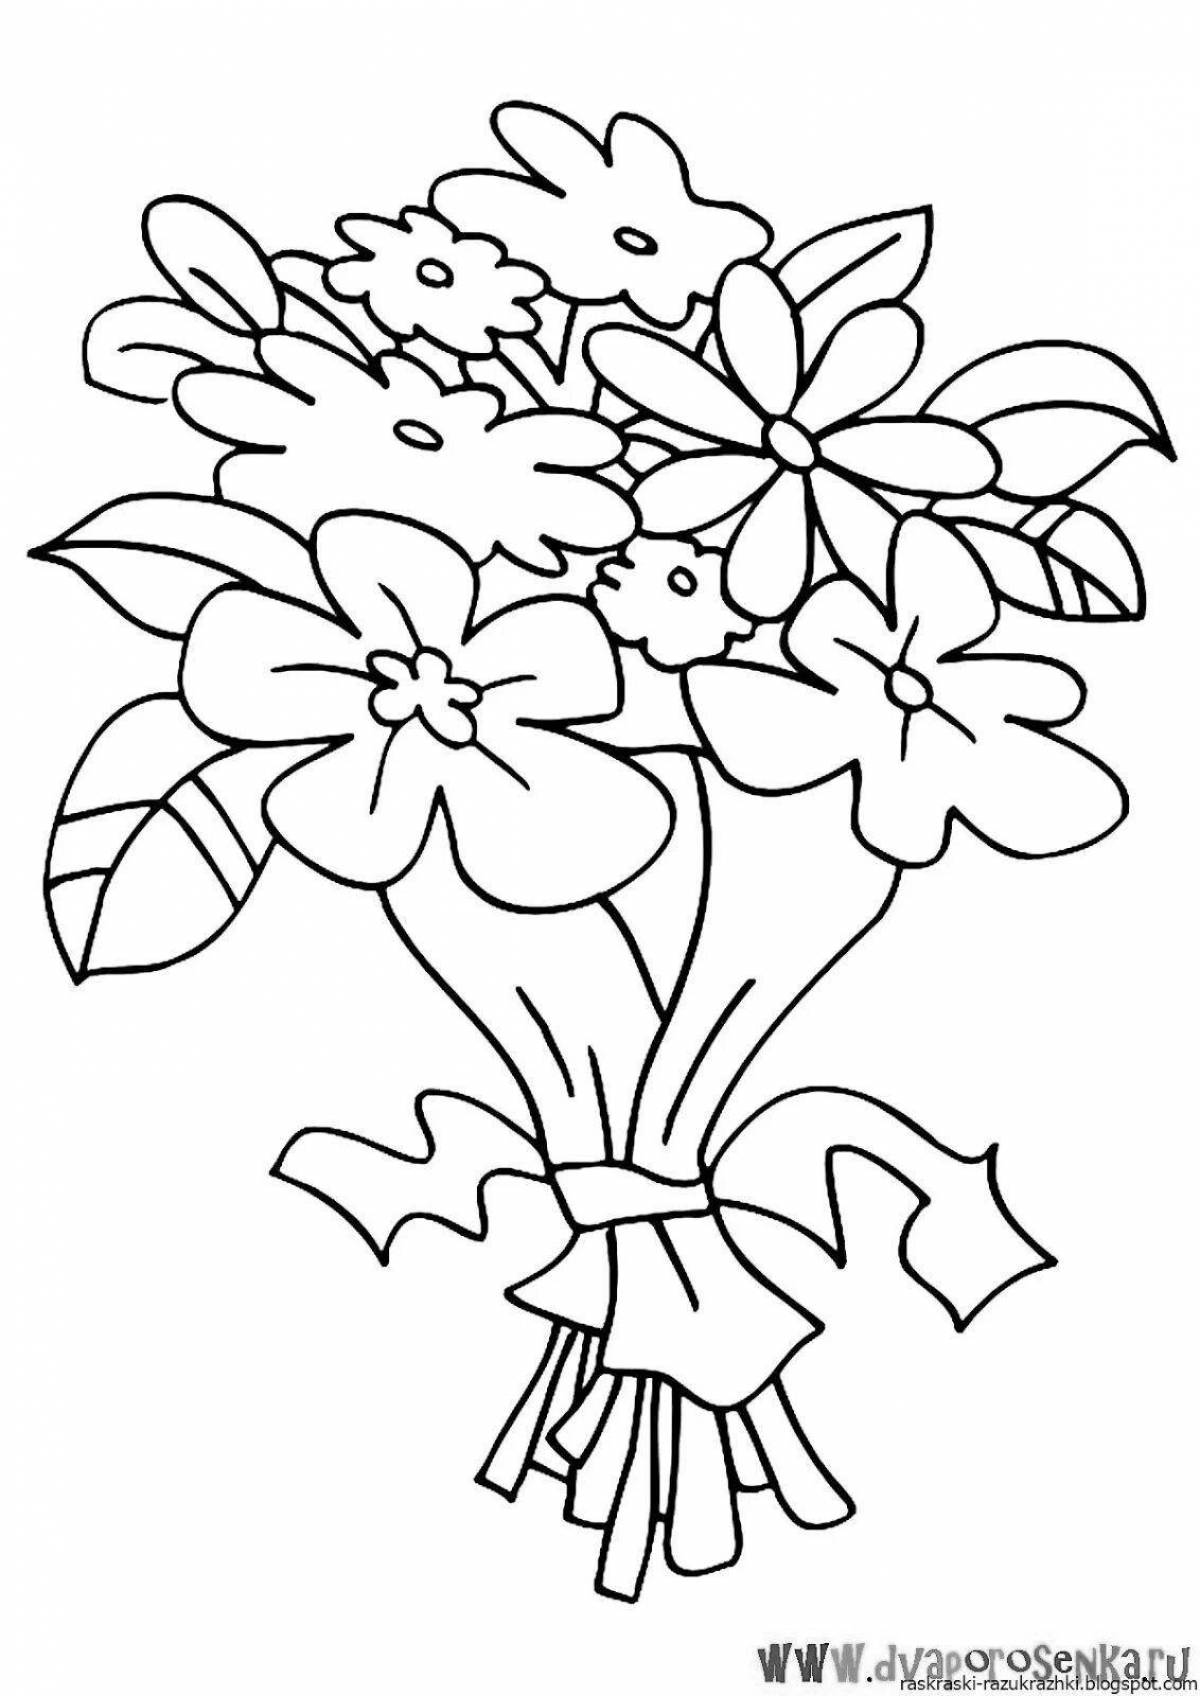 Colorful bouquet coloring book for kids